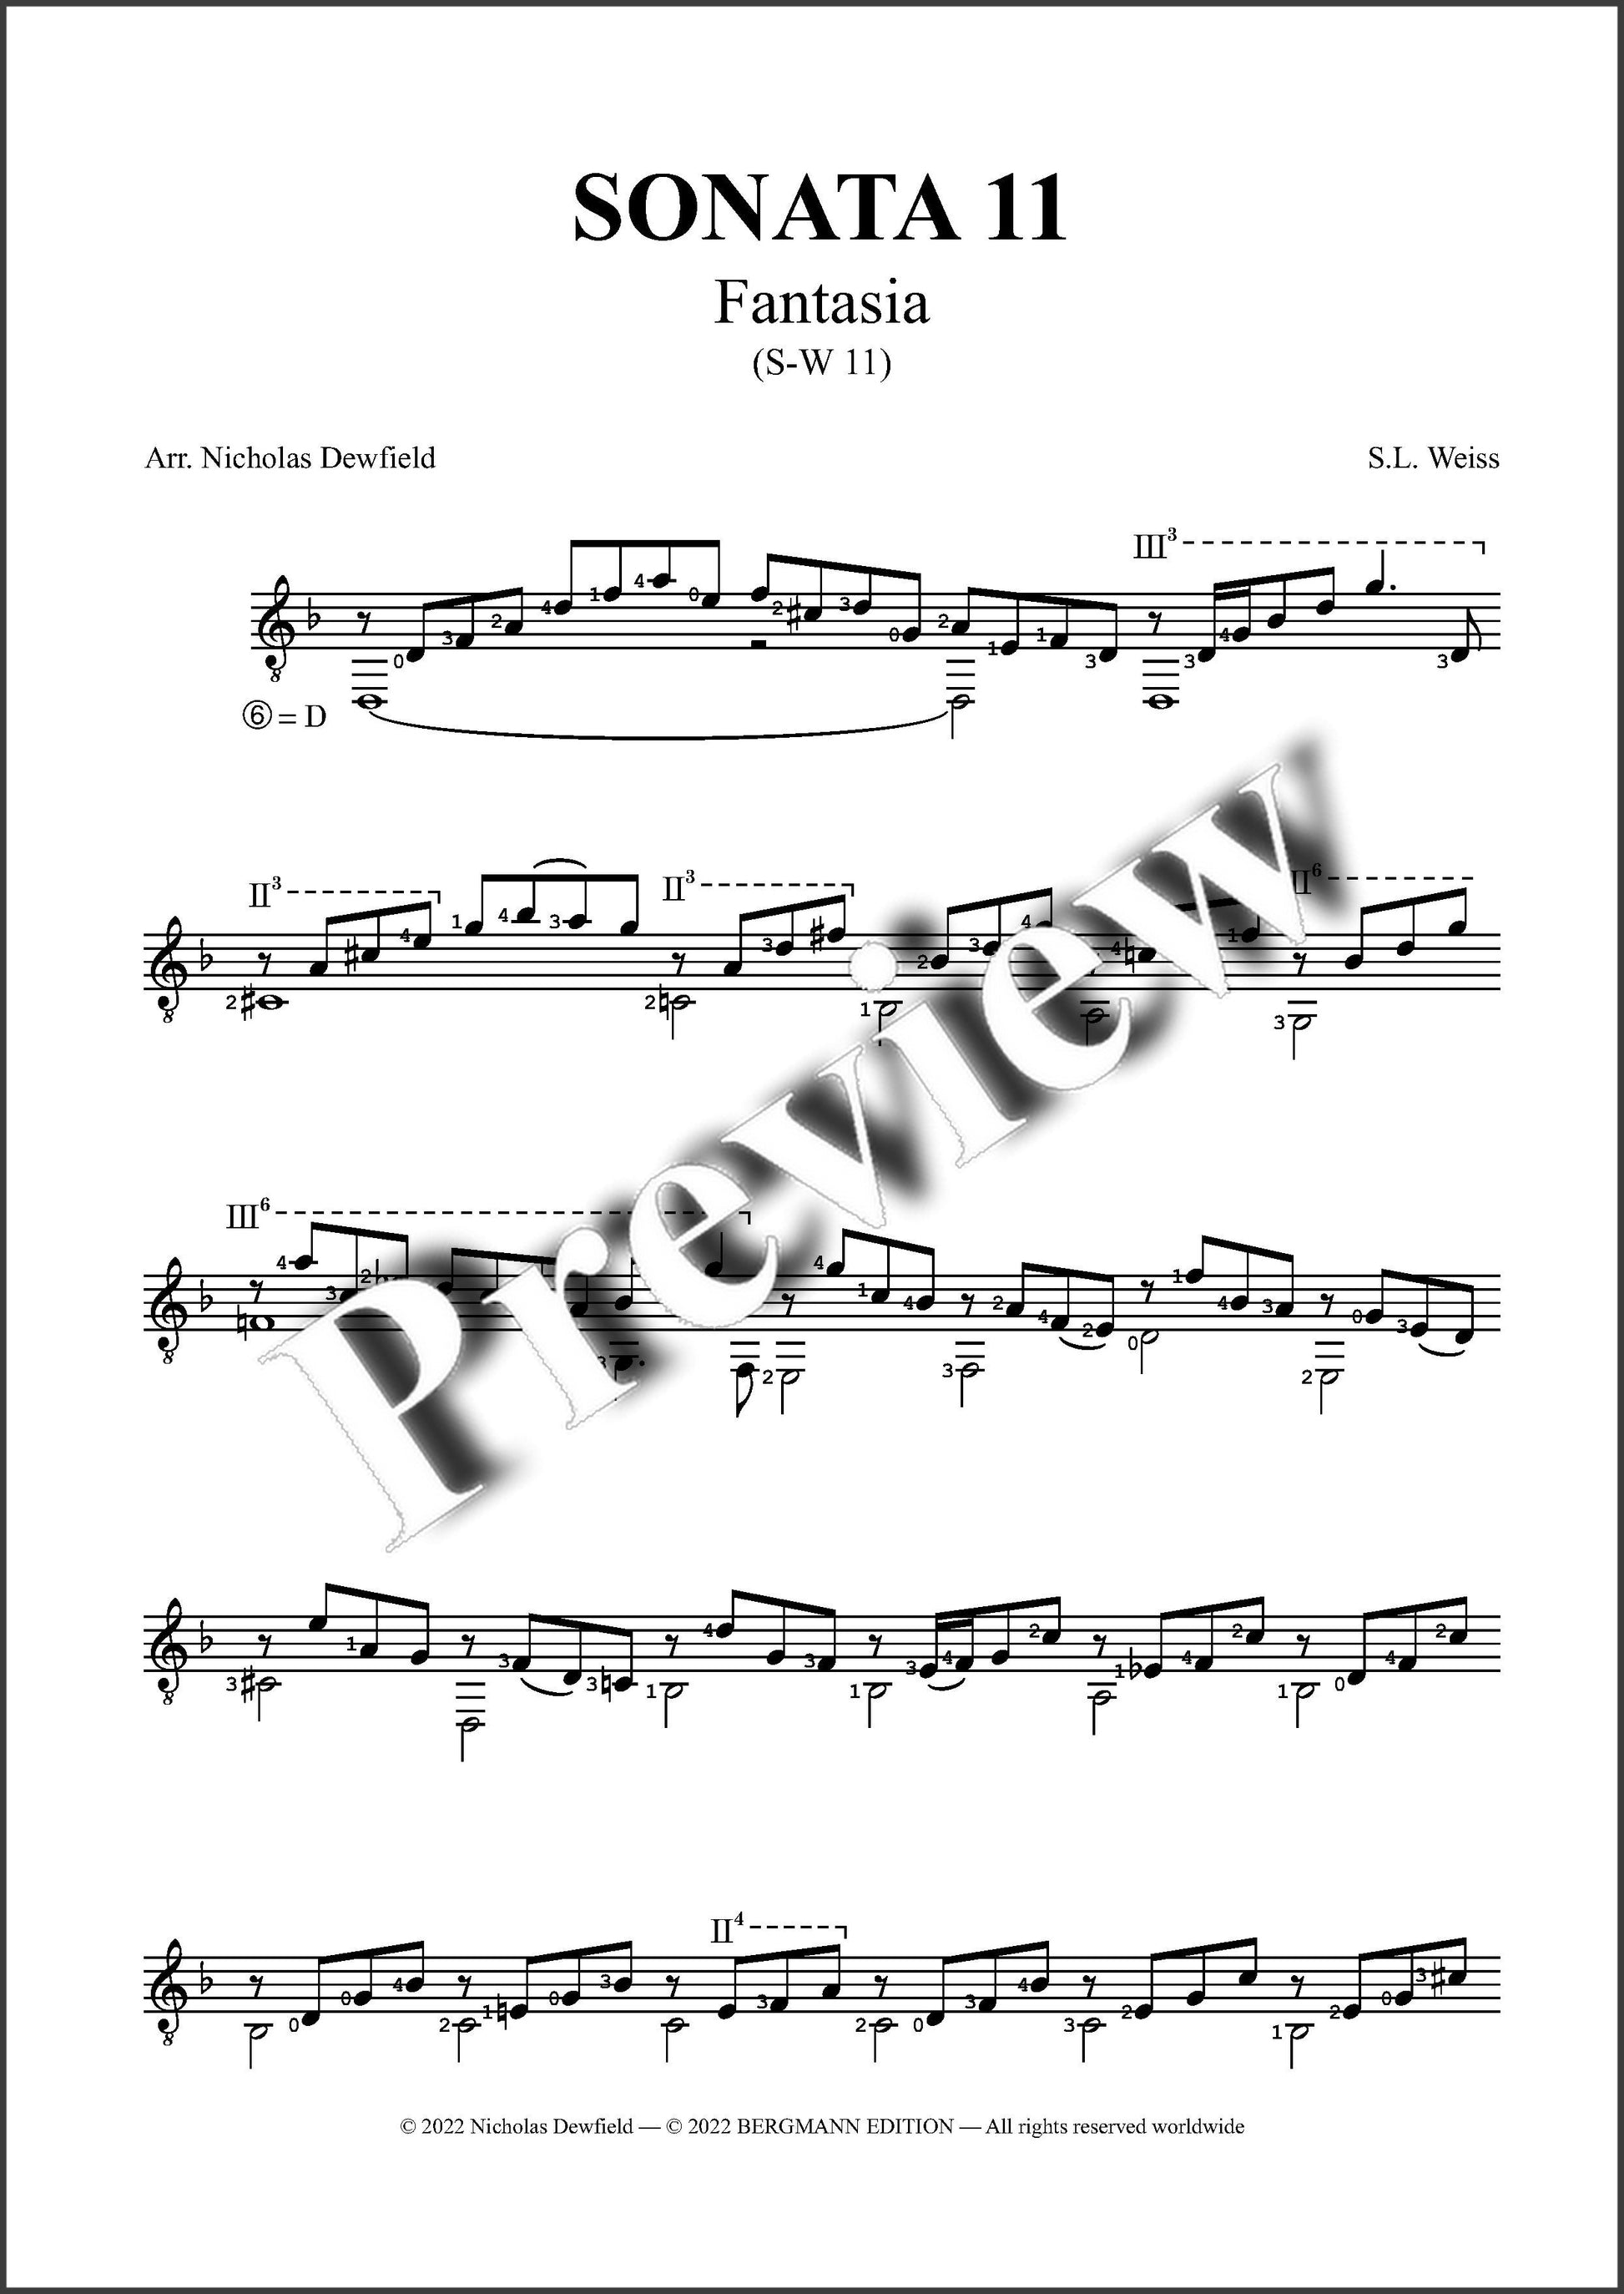 Weiss-Dewfield, Sonata No. 11 - preview of the fantasia